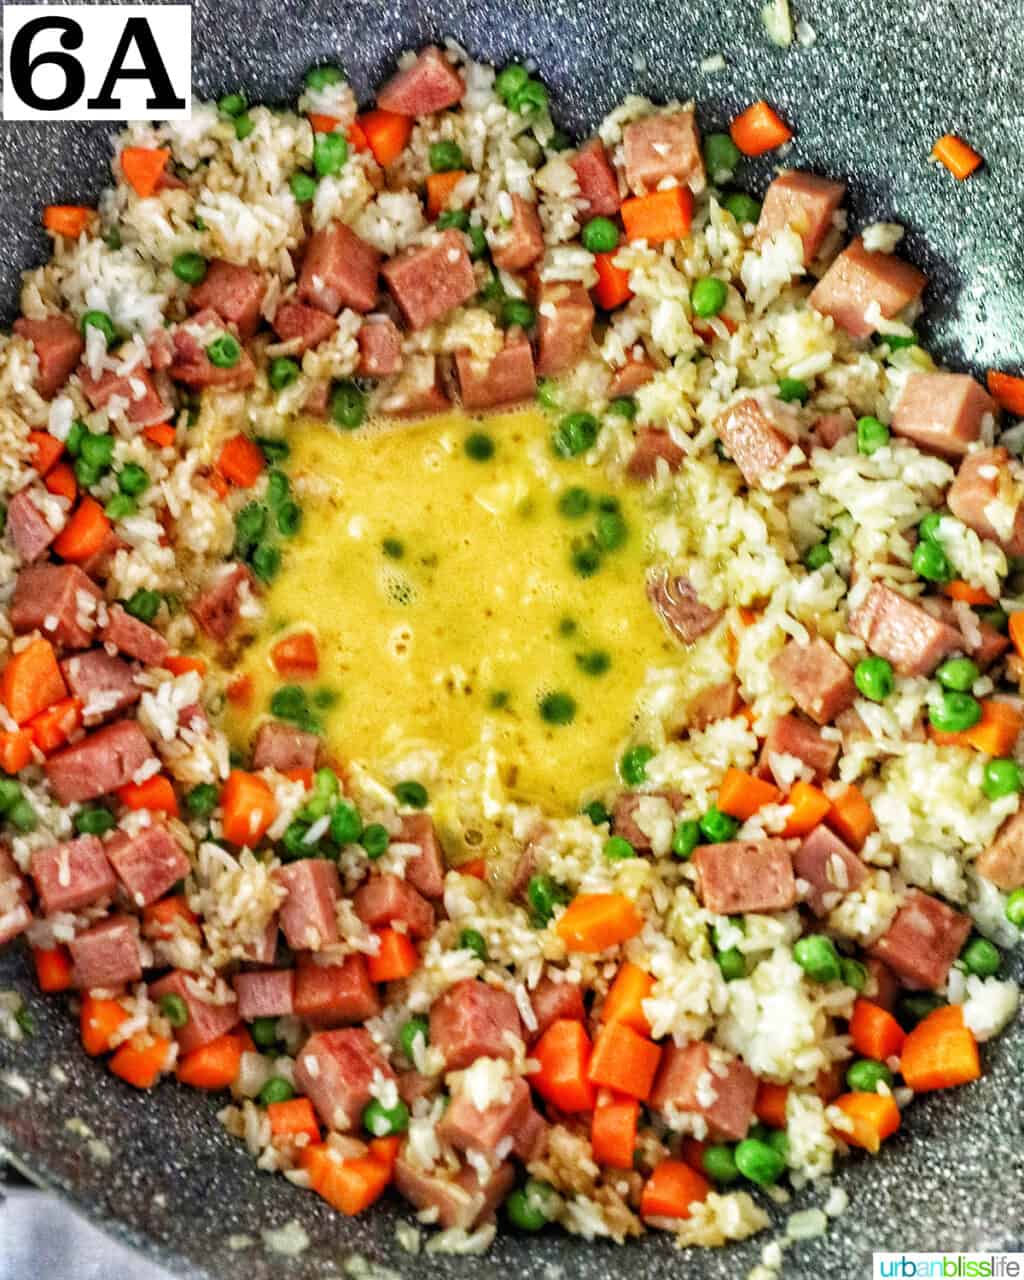 egg in the middle for spam fried rice in a wok.